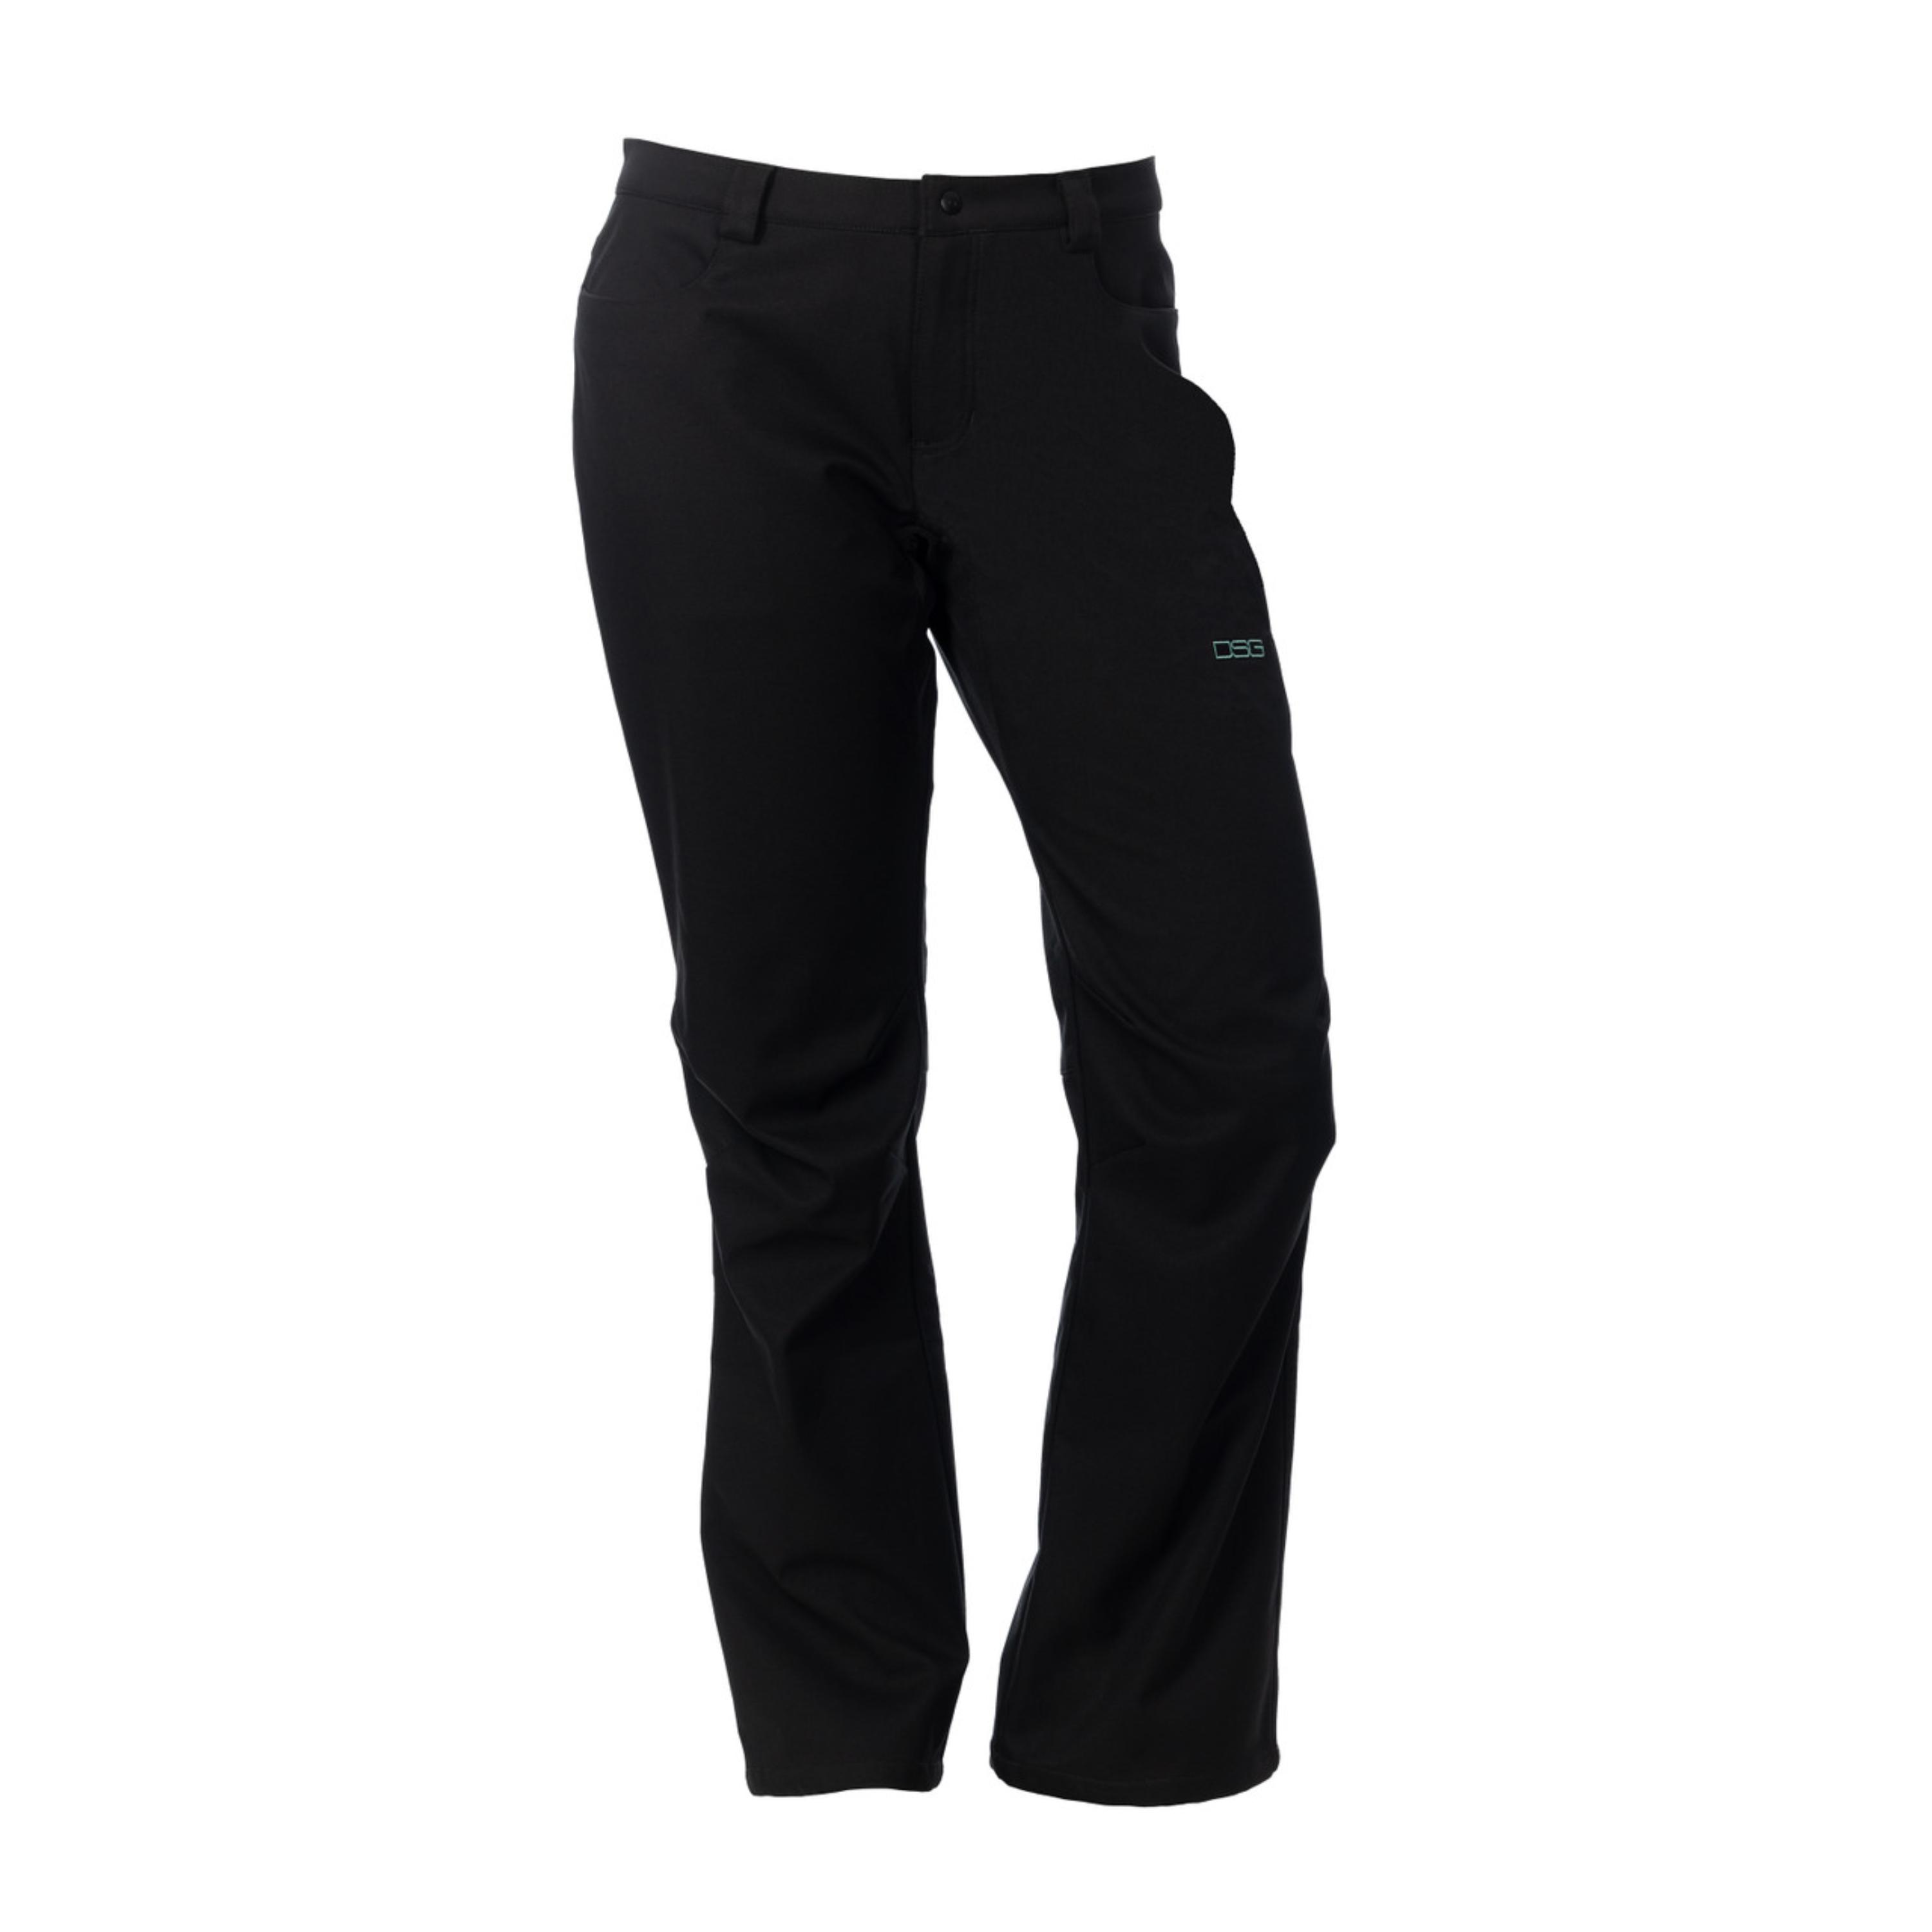 GIBRALTAR LADY T-ur Fabric Women's Motorcycle Pants Black For Sale Online 